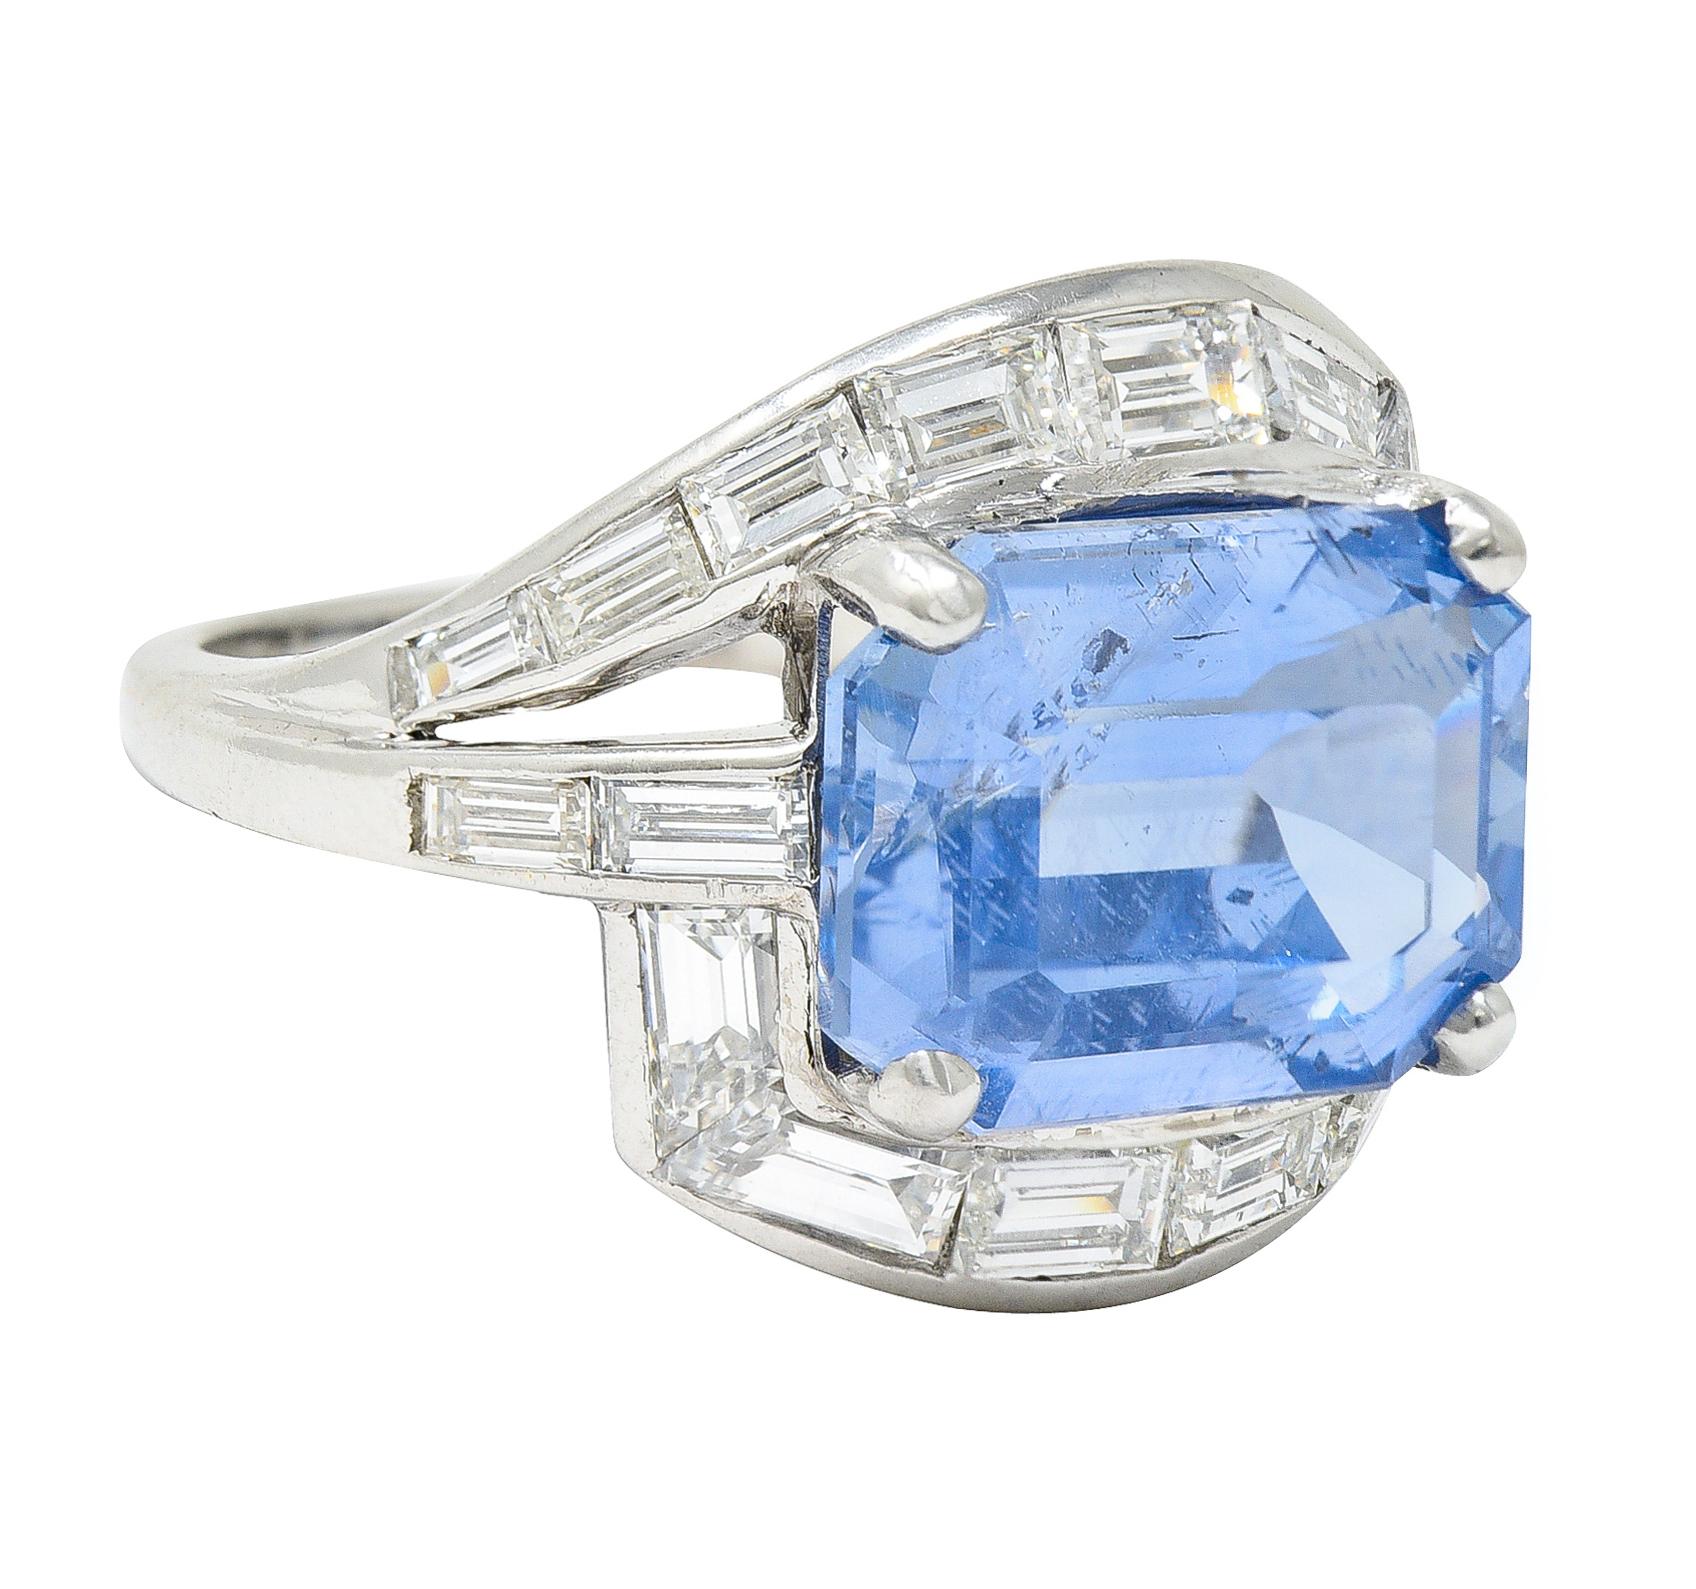 Bypass style ring features an emerald cut sapphire - set East to West. Weighing approximately 7.05 carats with medium light and slightly violetish blue color. Natural Ceylon in origin with no indications of heat treatment - encompassed by shoulders